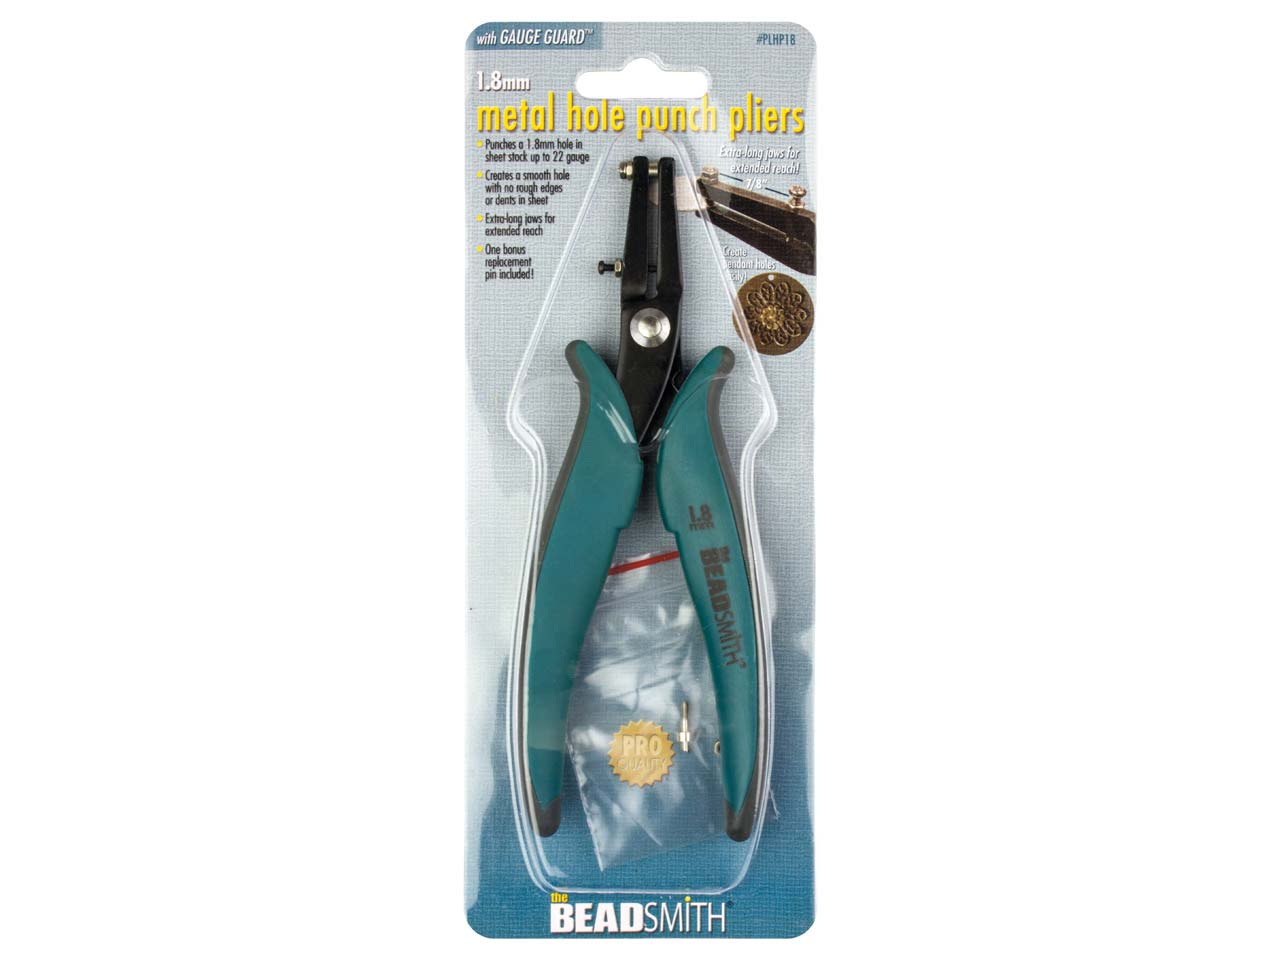 Beadsmith 1.8mm Hole Punch Pliers With Metal Guard - cooksongold.com